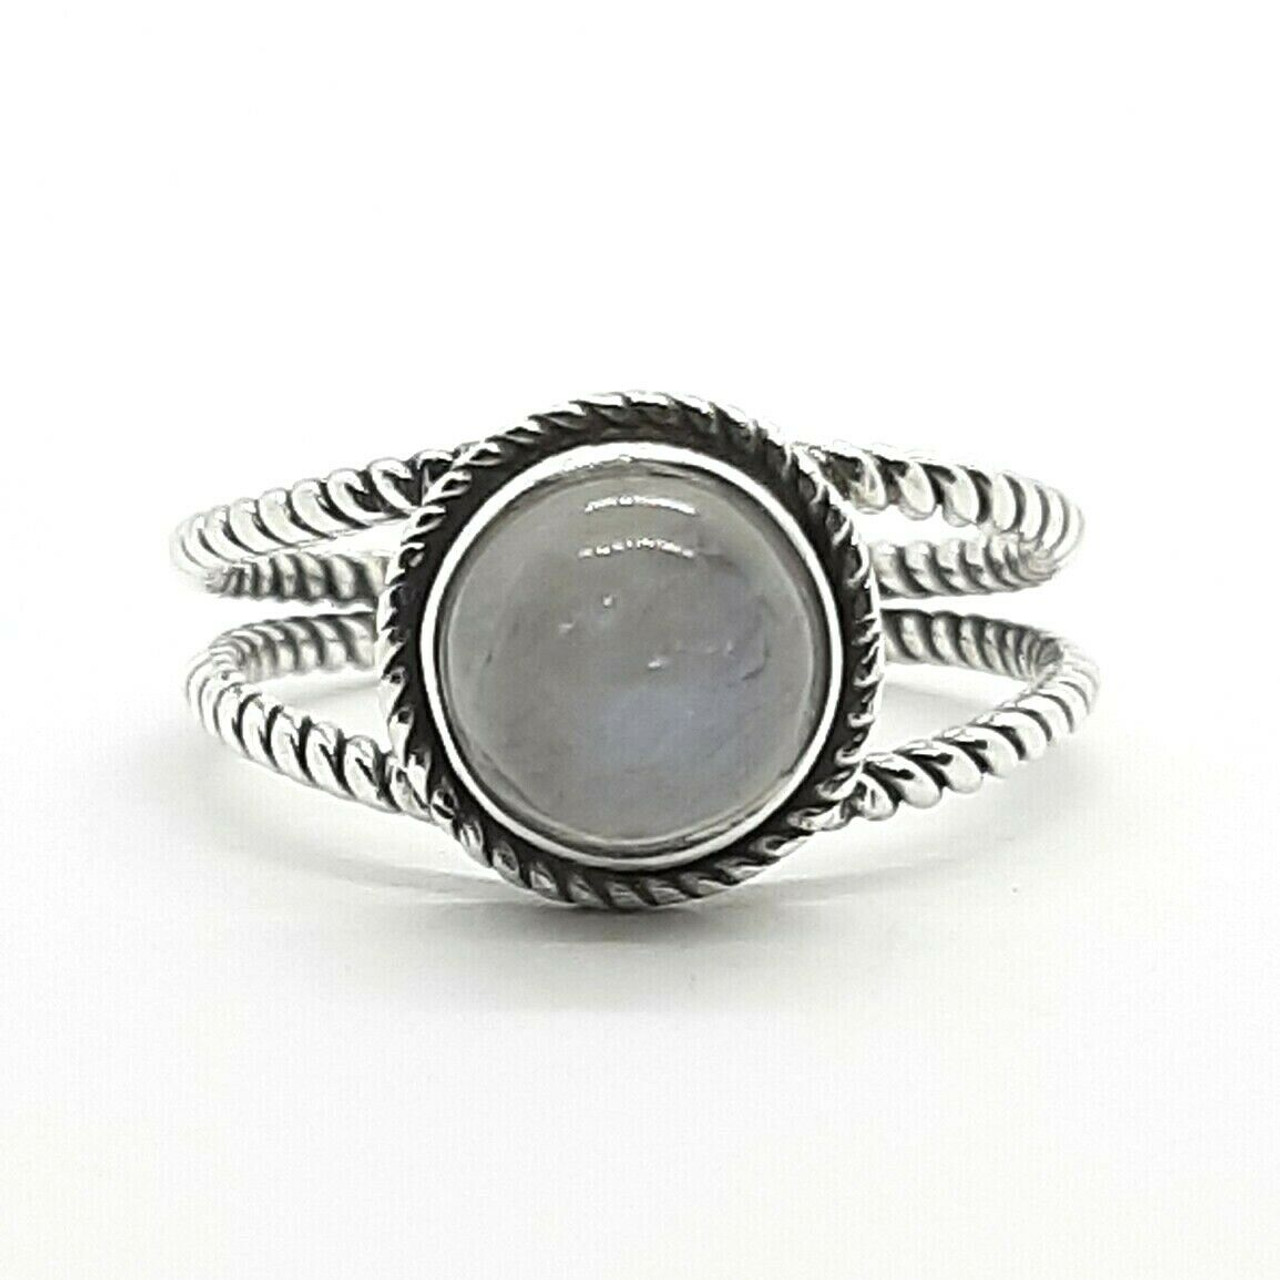 moonstone natural stone durr al najaf men ring jewelry sterling silver –  Abu Mariam Jewelry